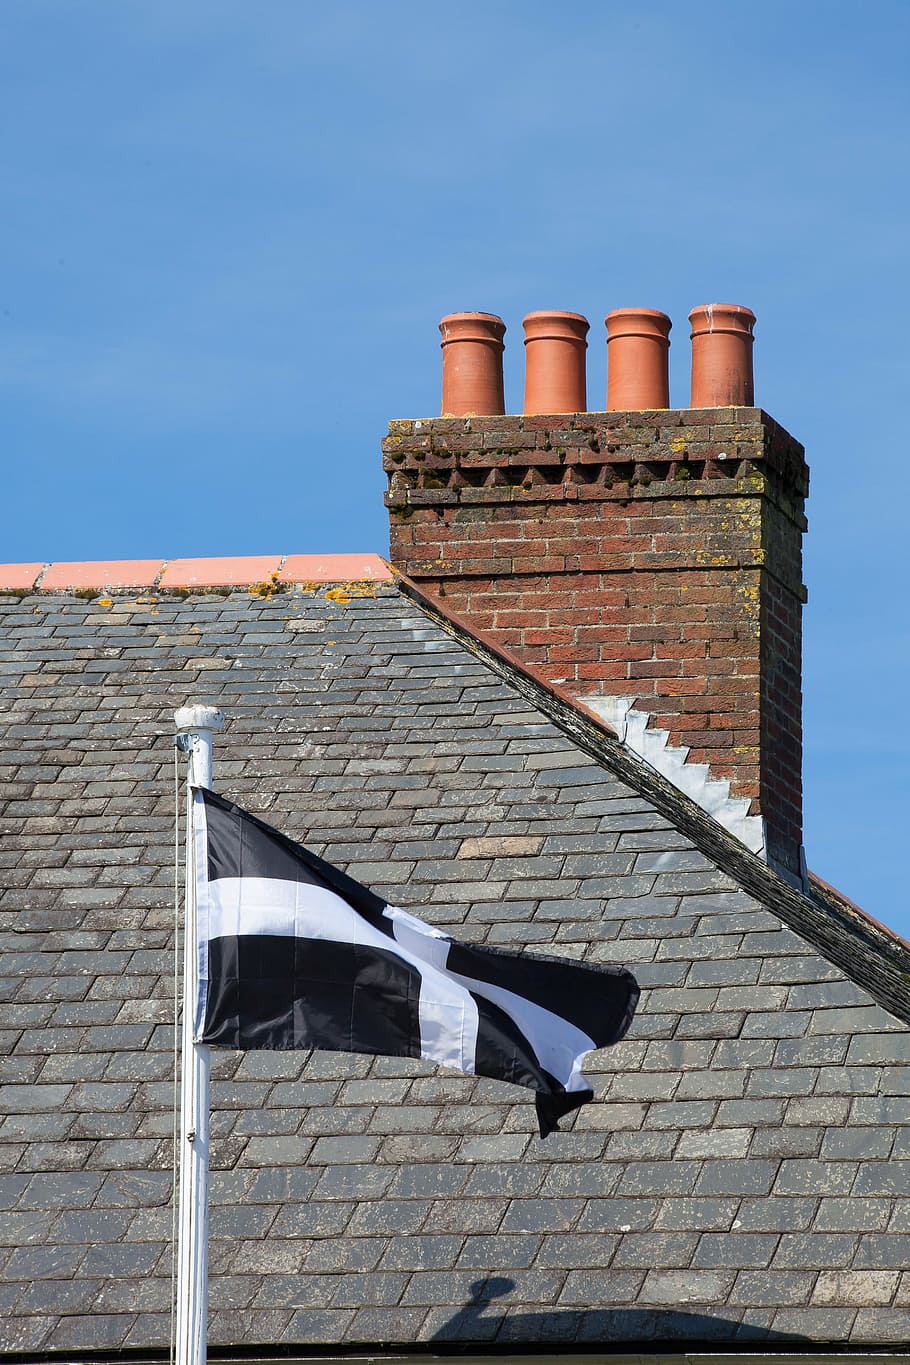 fireplace, roof, cornwall, england, flag, slate, roofing, architecture, old, home